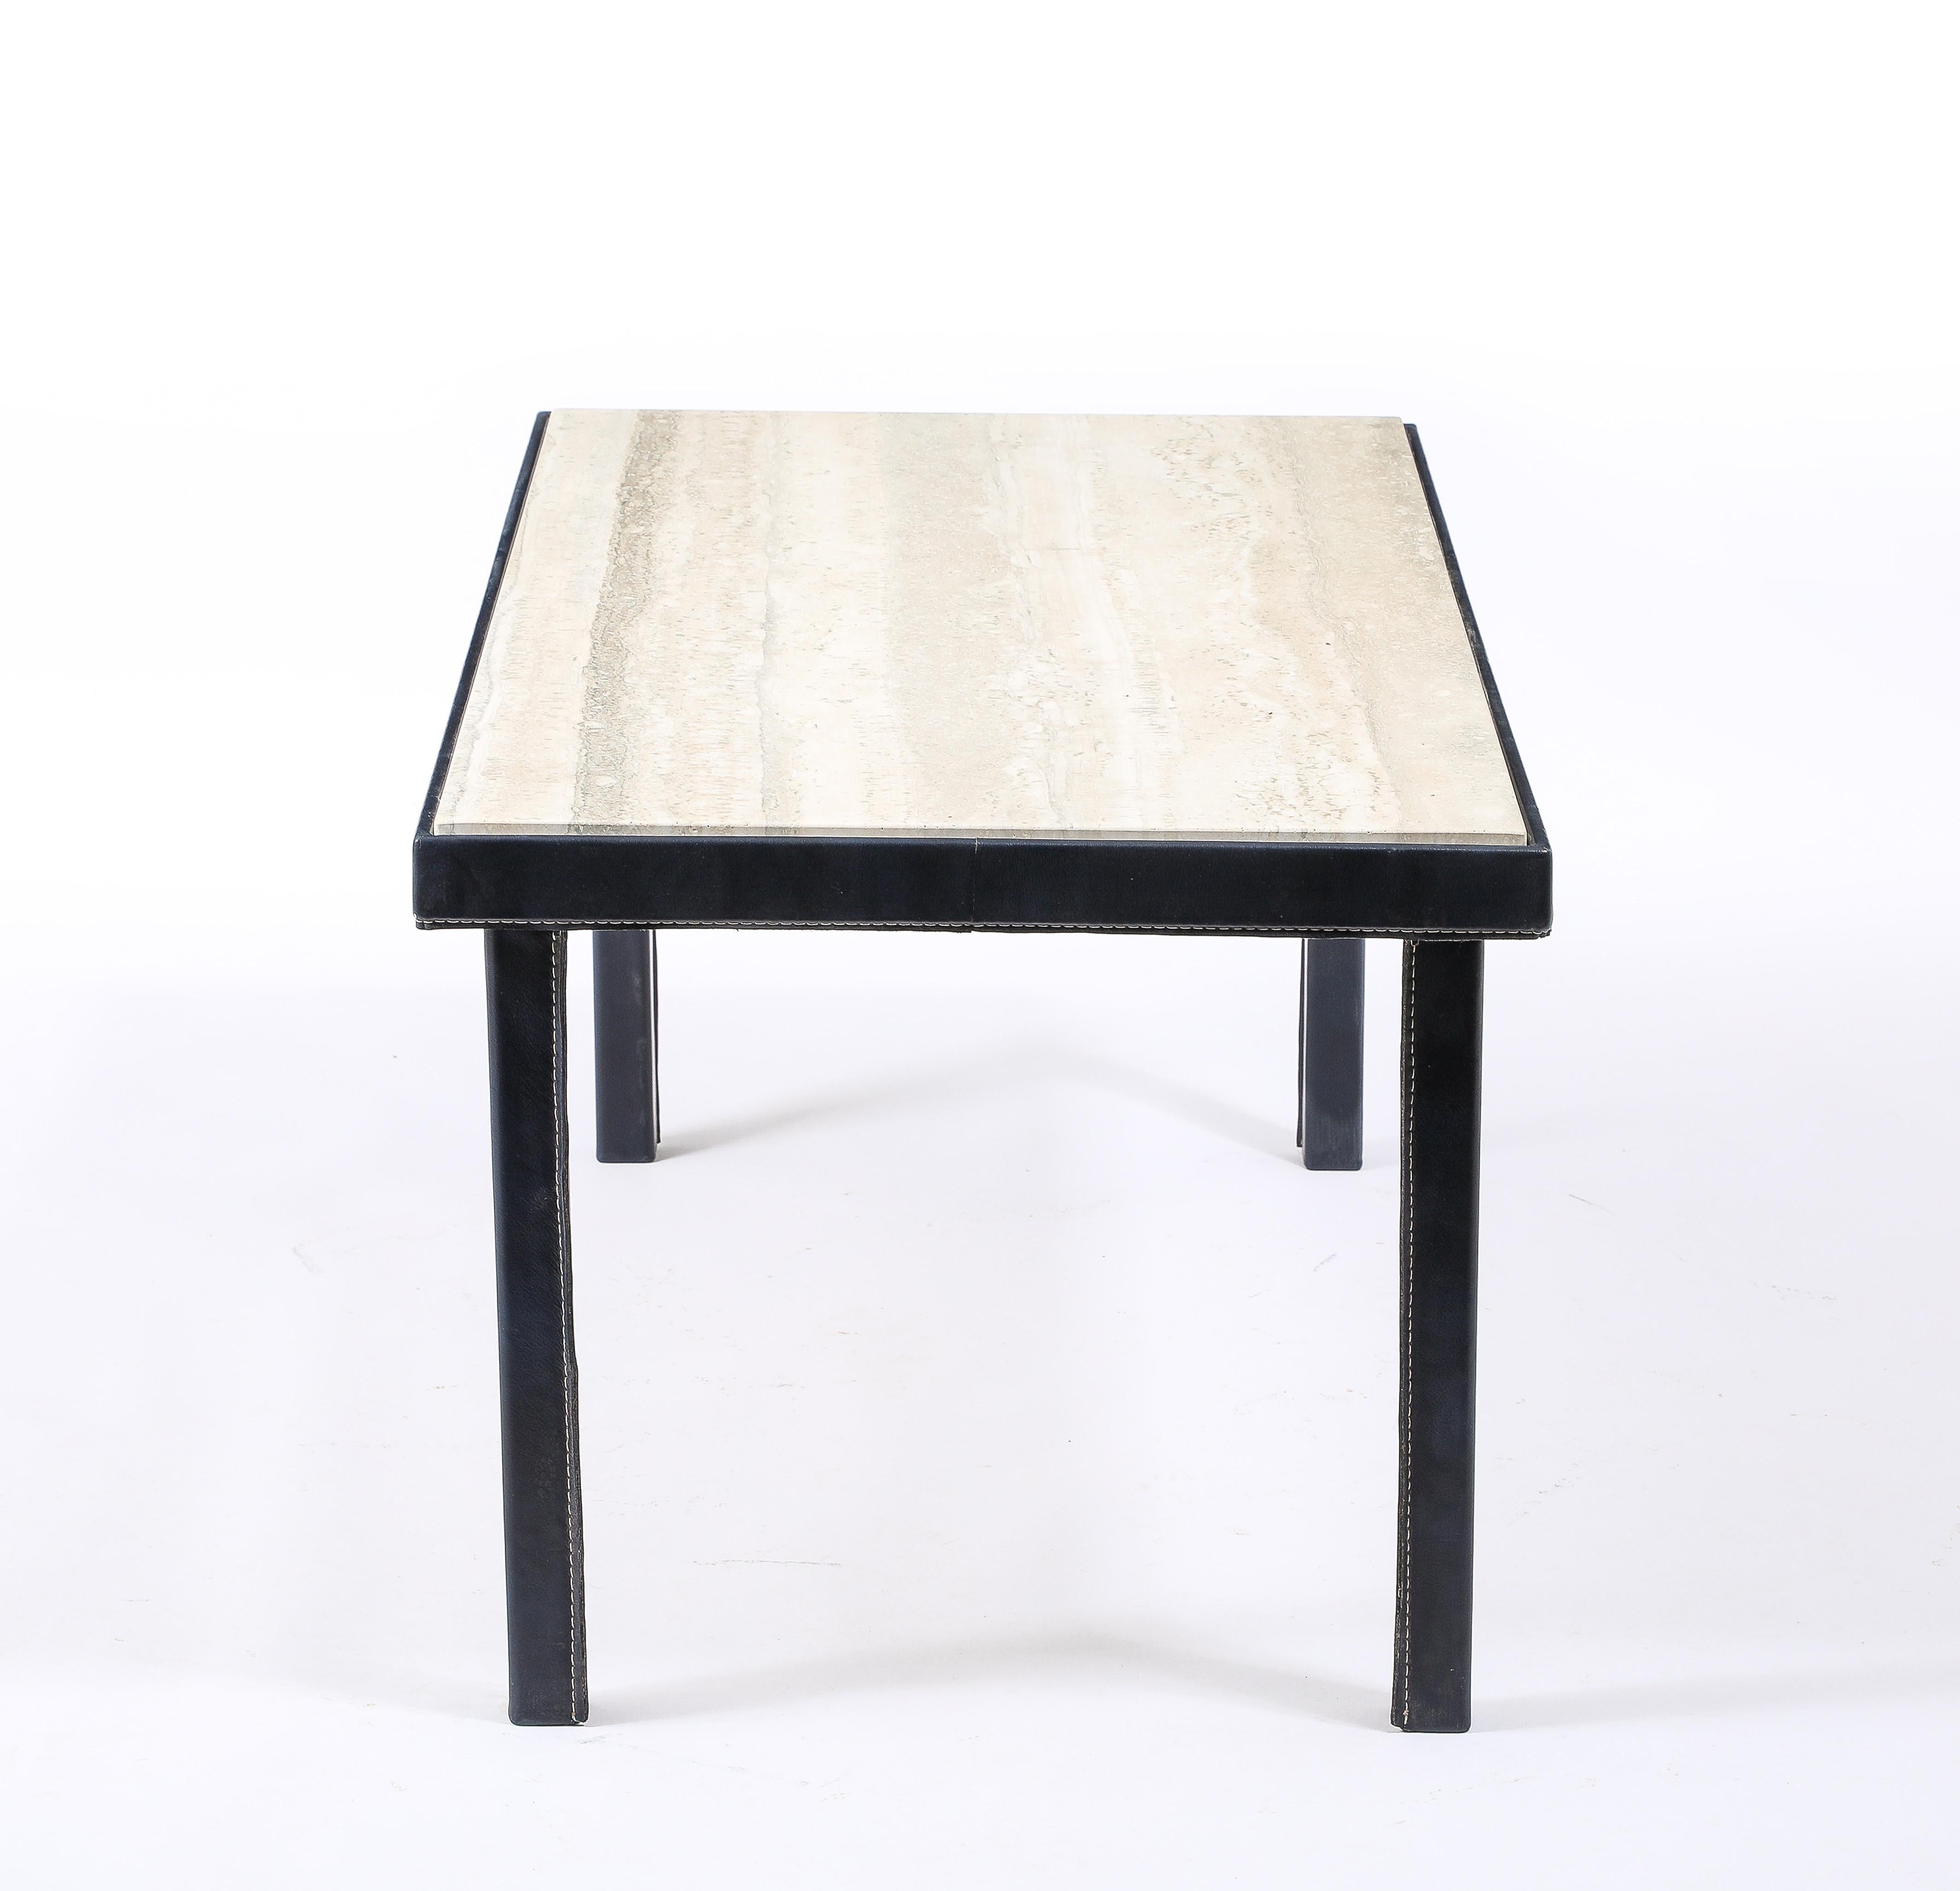 Jacques Adnet Stitched Blue Leather & Travertine Coffee Table, France 1950's For Sale 9